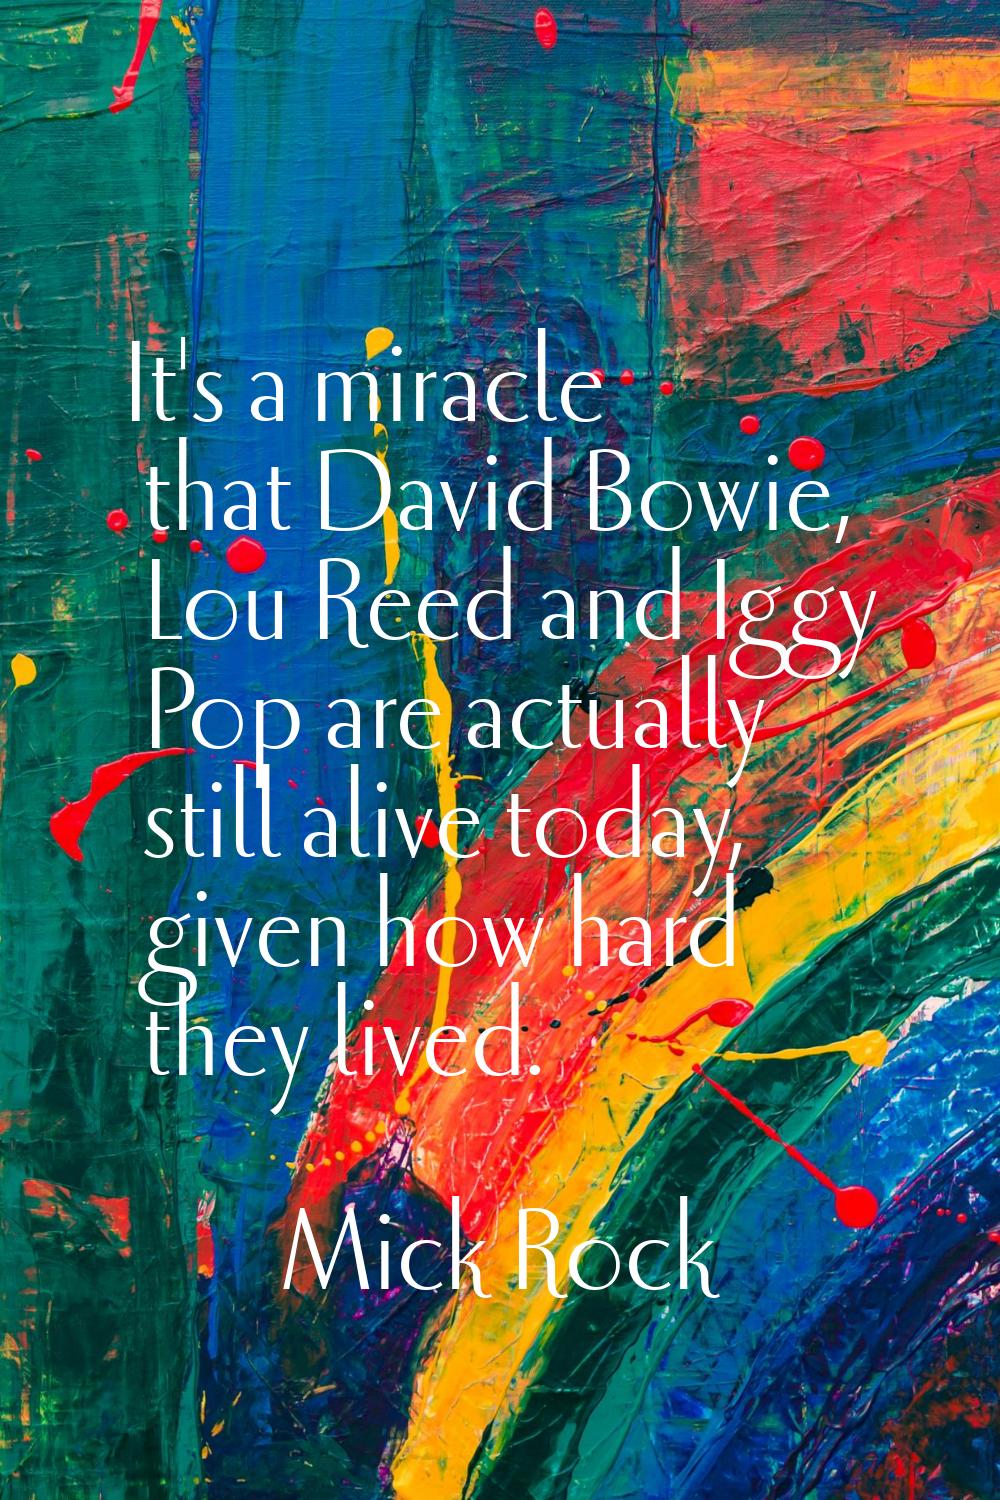 It's a miracle that David Bowie, Lou Reed and Iggy Pop are actually still alive today, given how ha